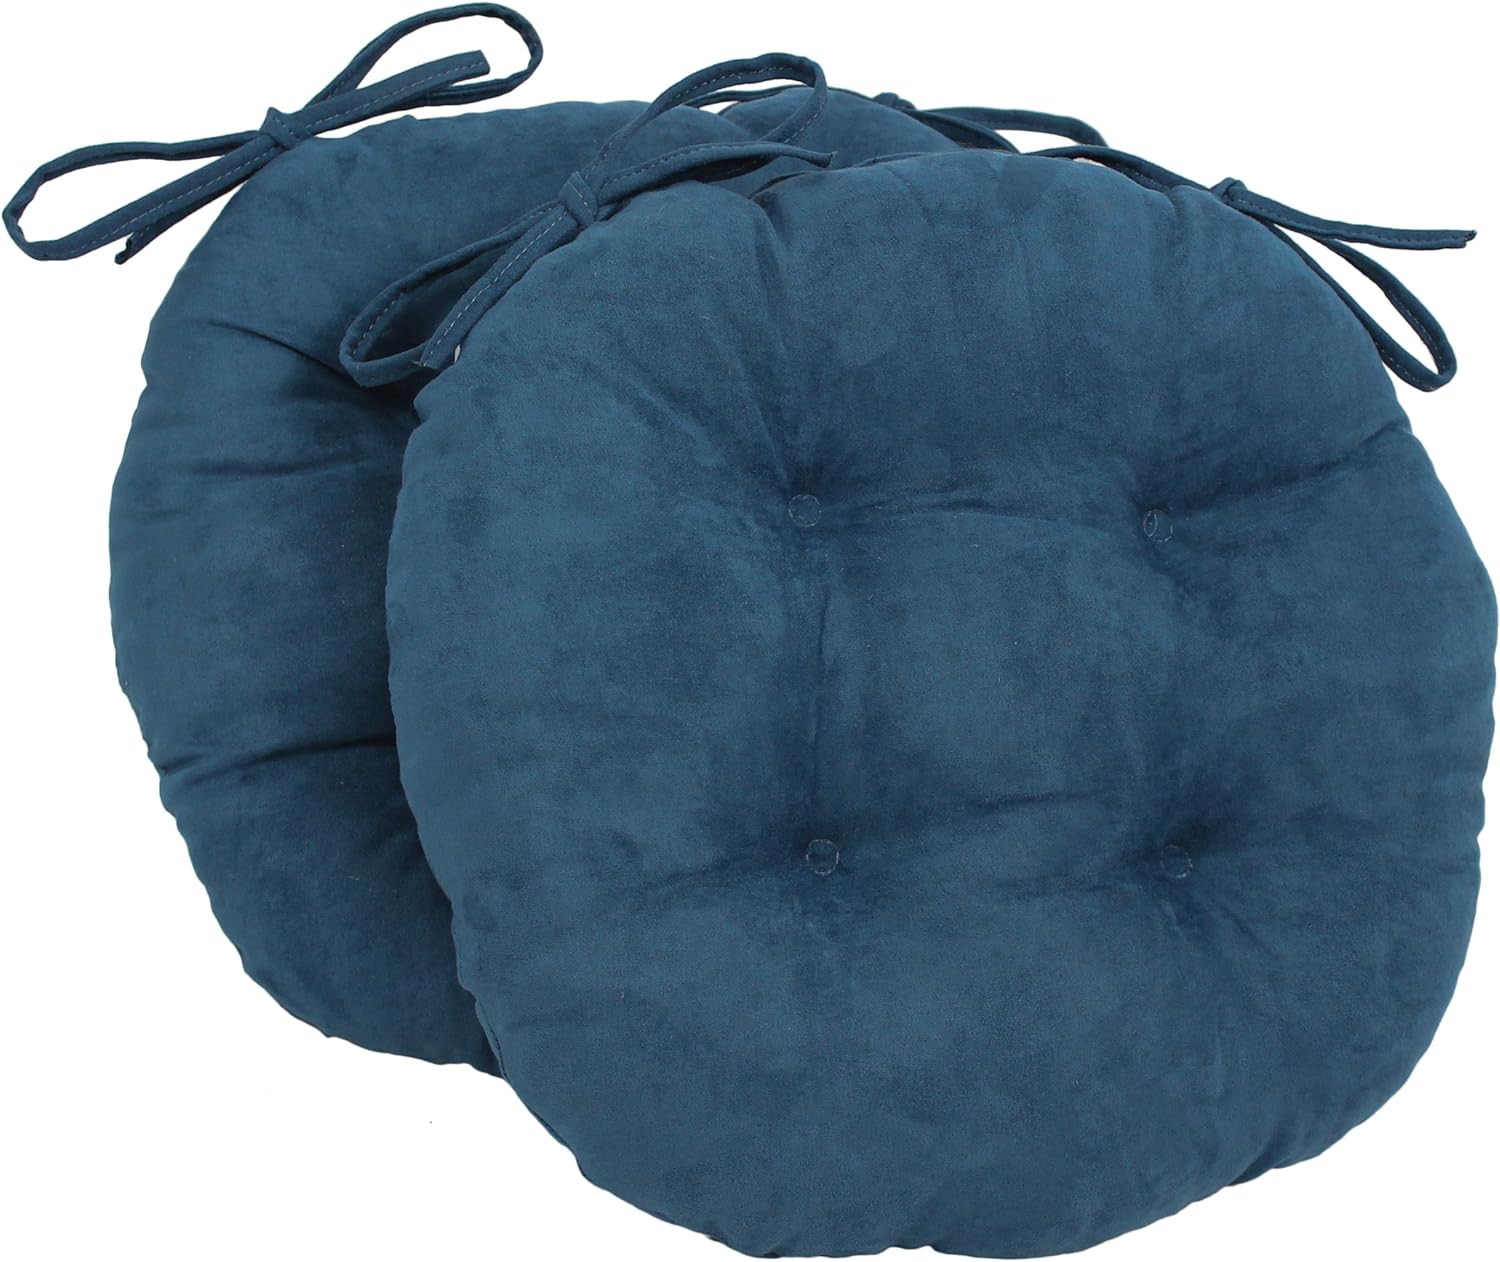 Blazing Needles 16-inch Solid Micro Suede Round Tufted Chair Cushions (Set of 2) - Indigo